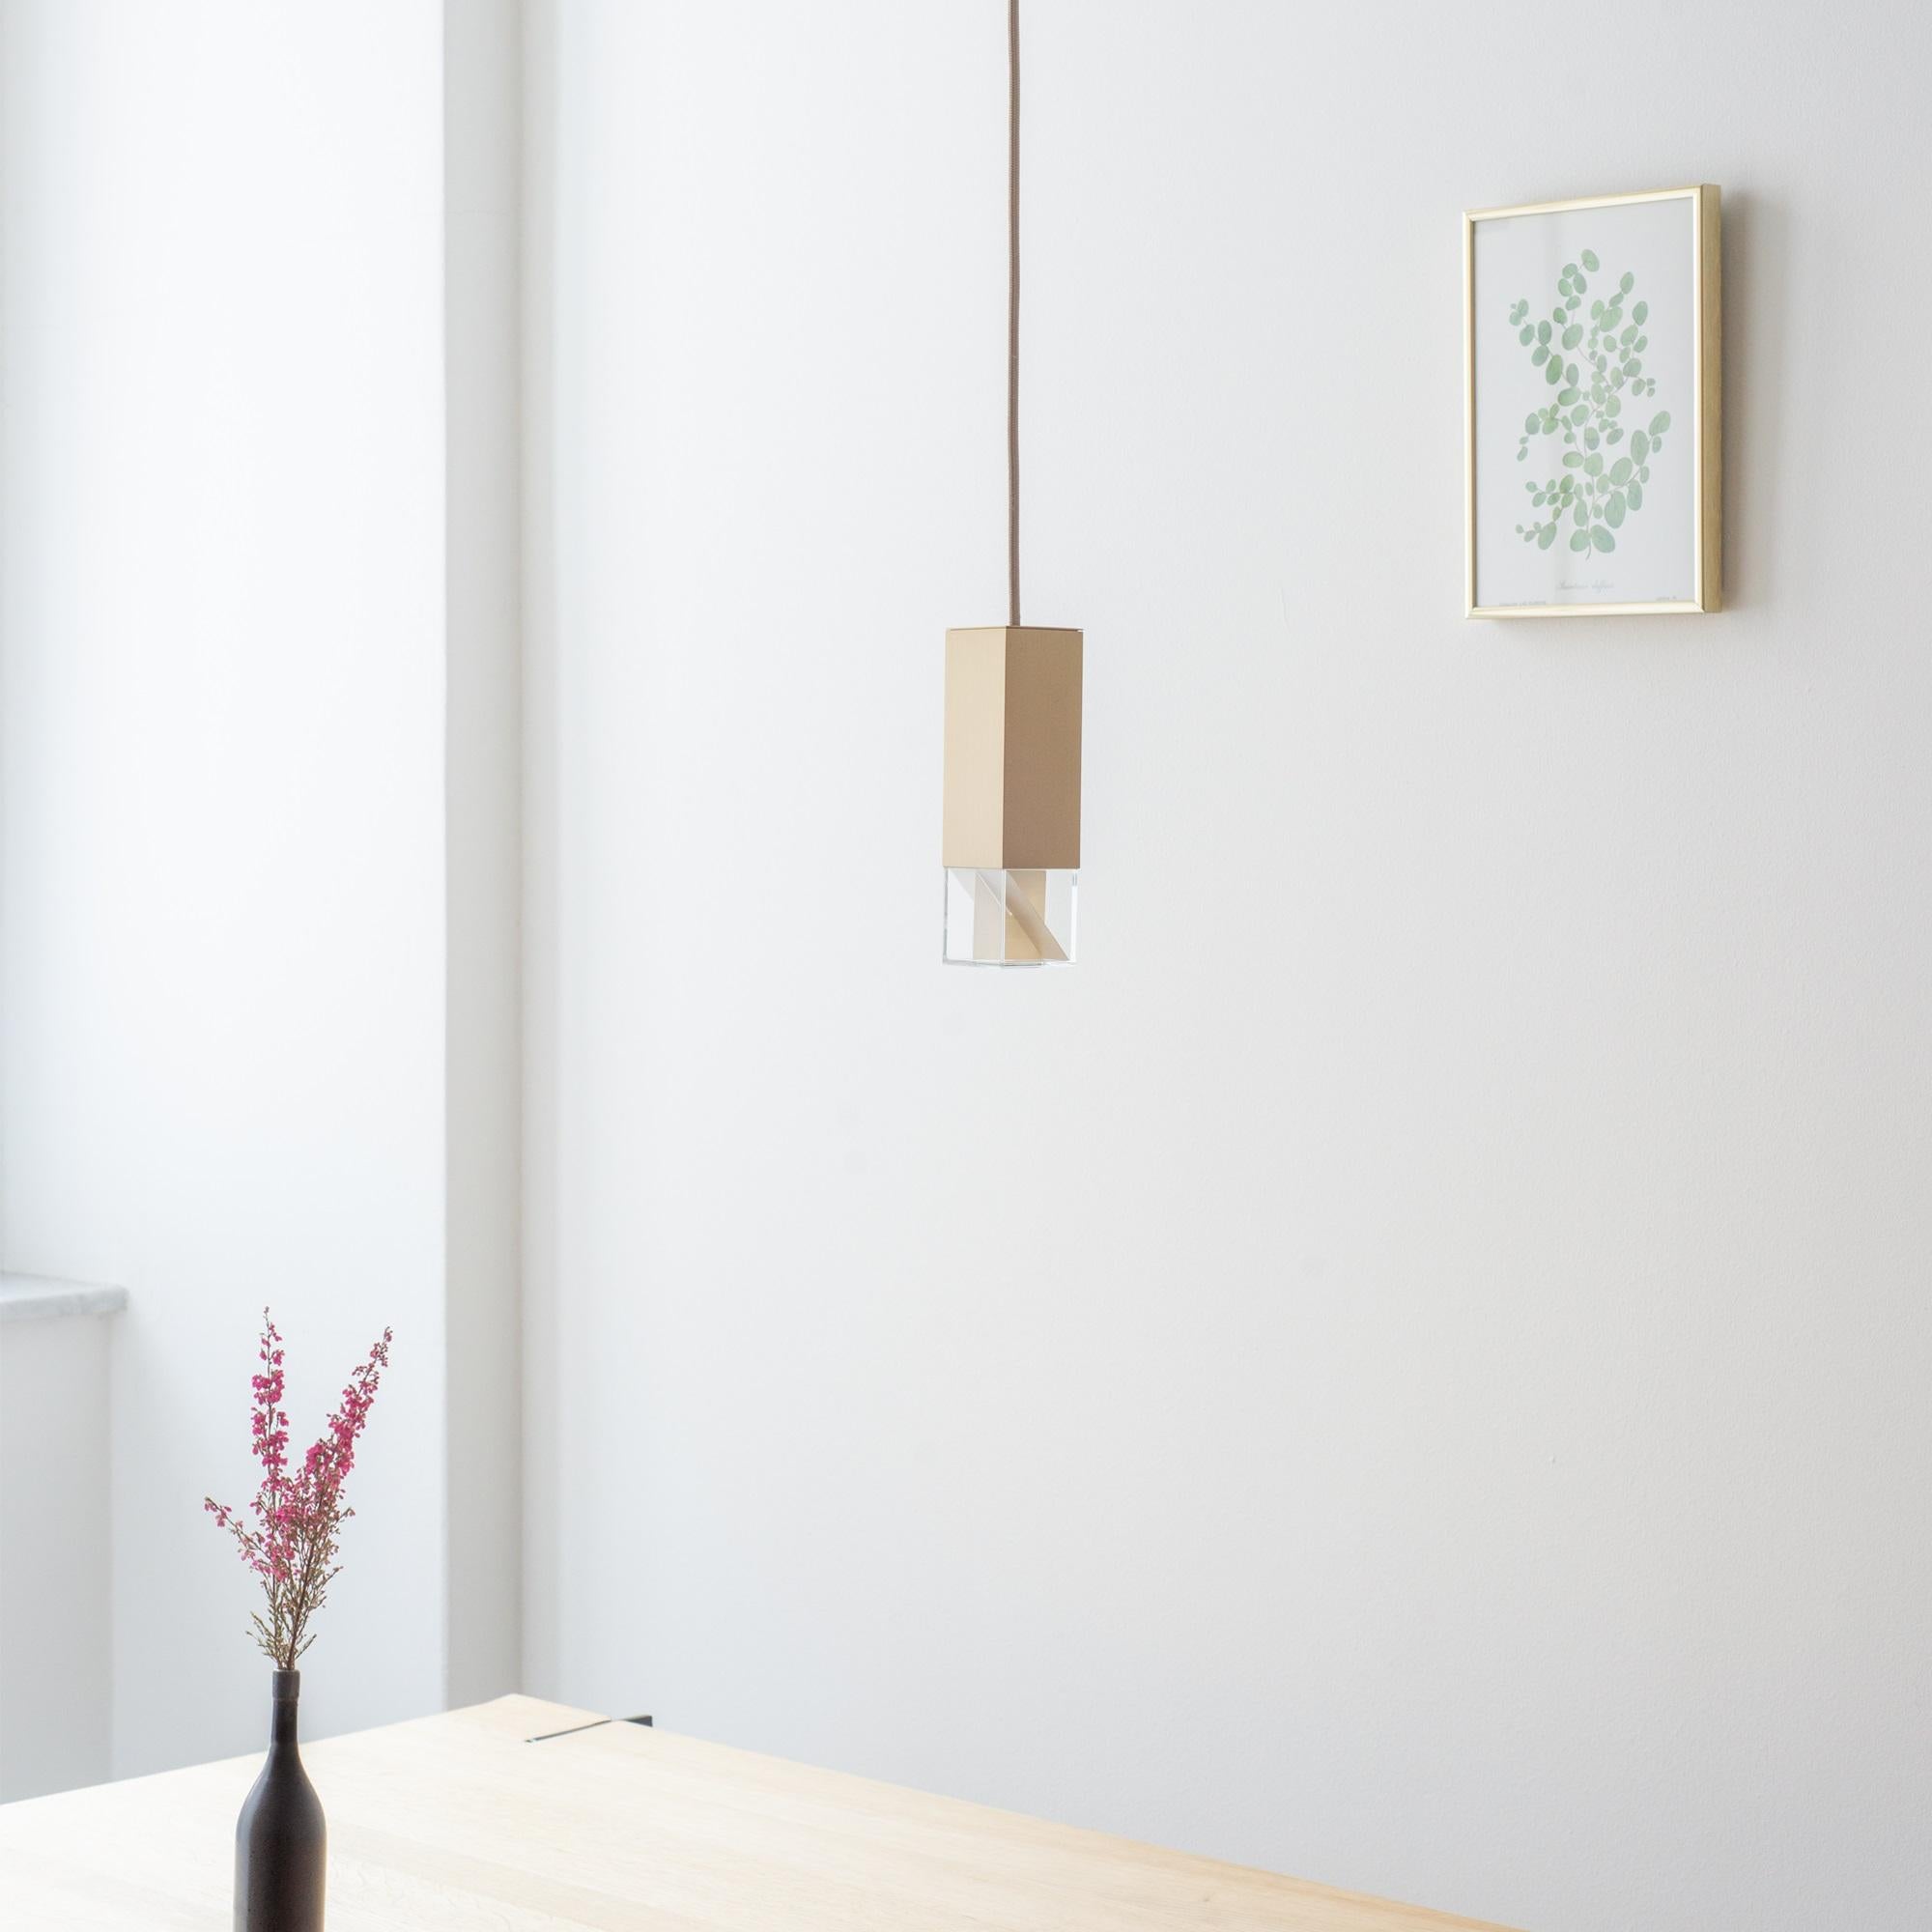 This refined pendant lamp has a simple design that emphasizes its contemporary style and the prized materials used to craft it. The square ceiling plate (5 x 5 x 5cm) and the rectangular shade are handmade of satin-finished brass, connected by a